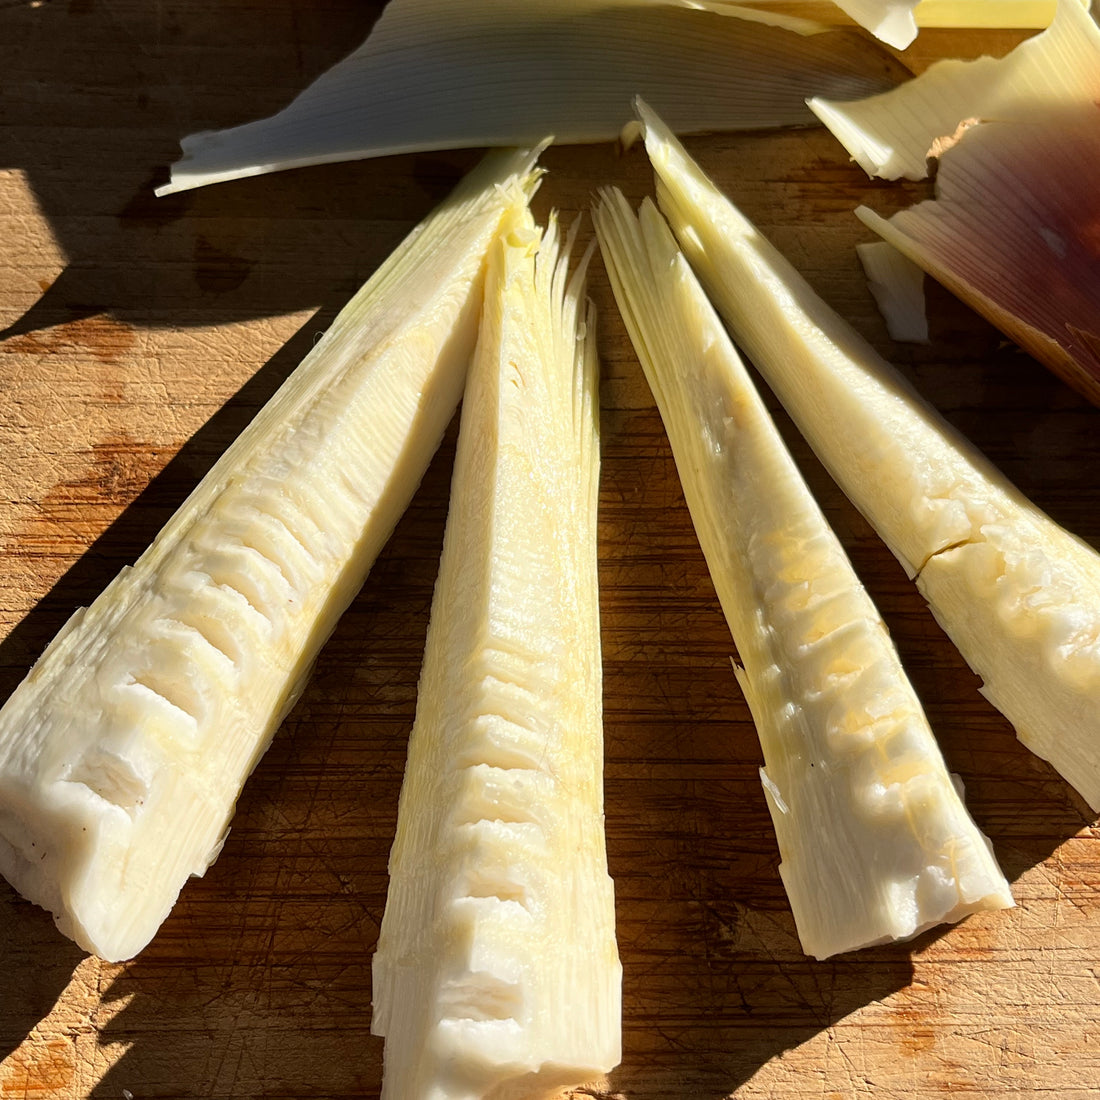 fresh picked bamboo shoots from www.Penrynorchardspecialties.com